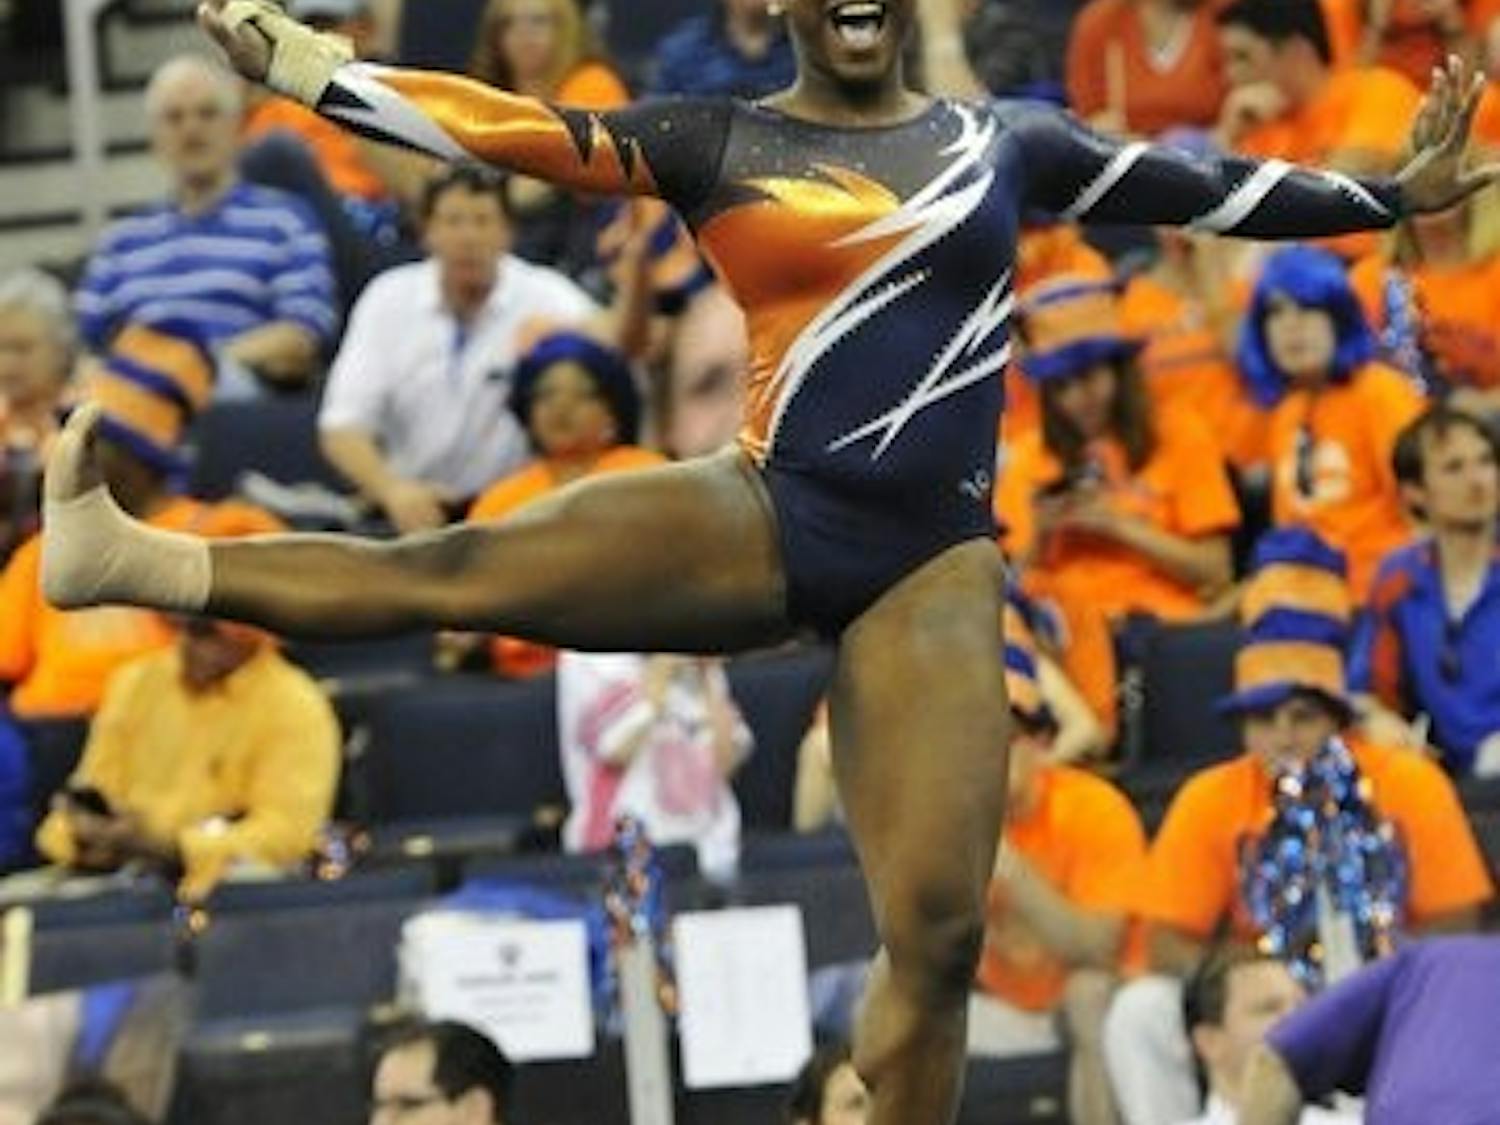 Auburn's Bri Guy scores a 9.90 on the floor at the 2012 SEC Gymnastics Championship in Duluth, Ga., March 24. Guy earned second team All-SEC honors for her performance this season. (Photo Courtesy of Anthony Hall)